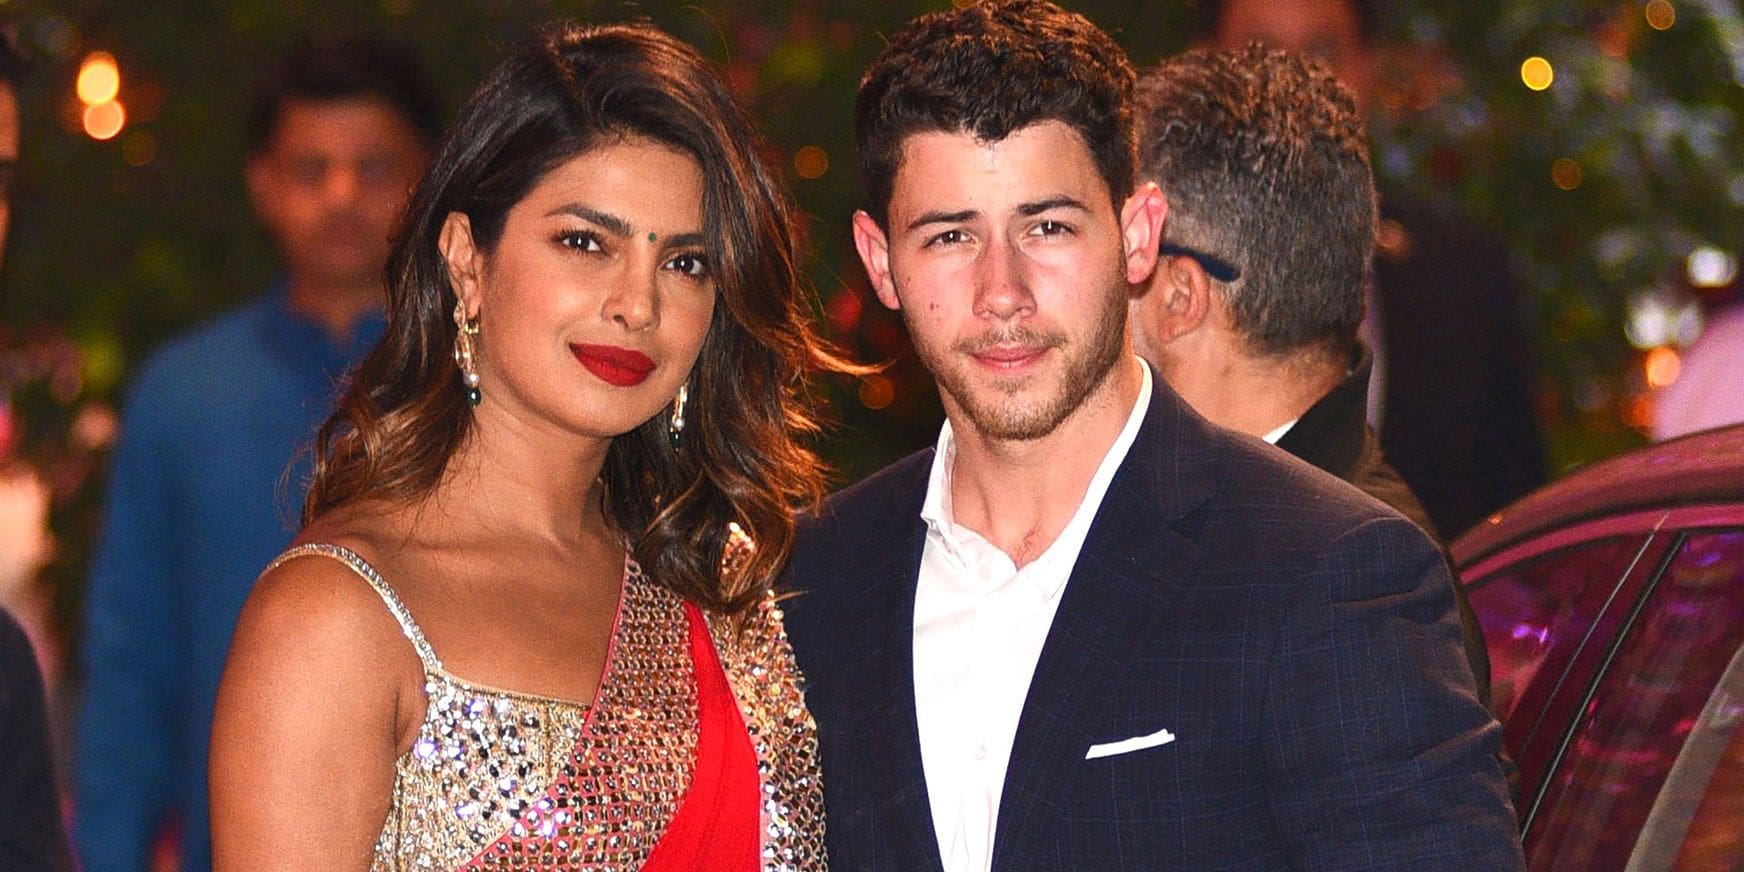 ”nick-jonas-and-priyanka-chopra-say-time-for-action-is-now-in-the-fight-against-systemic-racism”